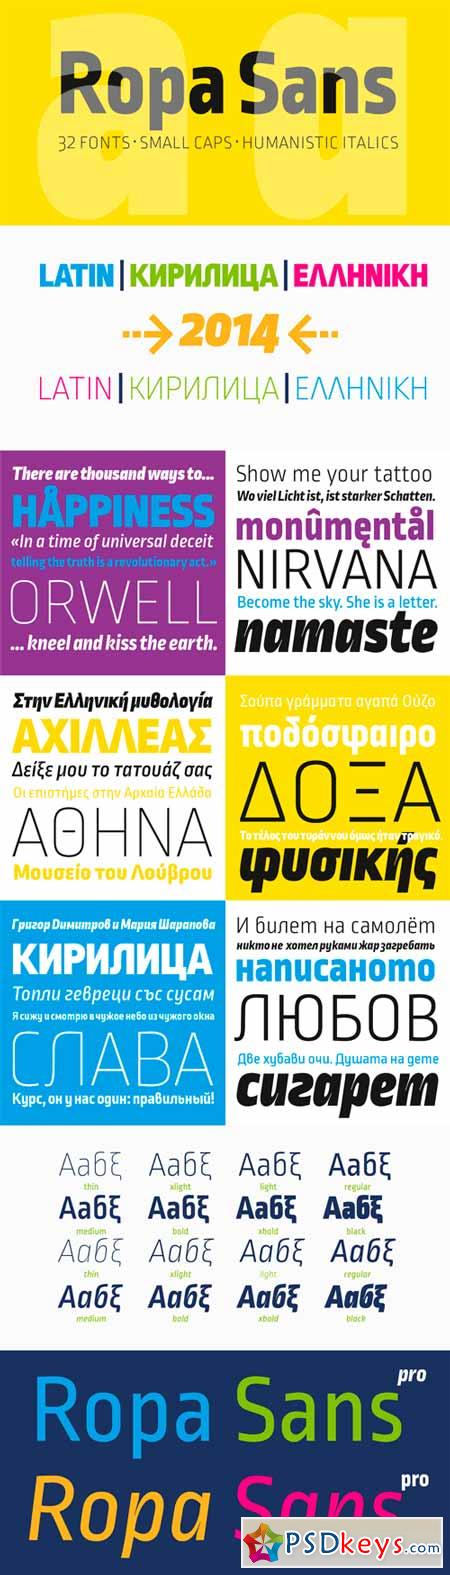 Ropa Sans Pro Font Family - 32 Fonts for $300